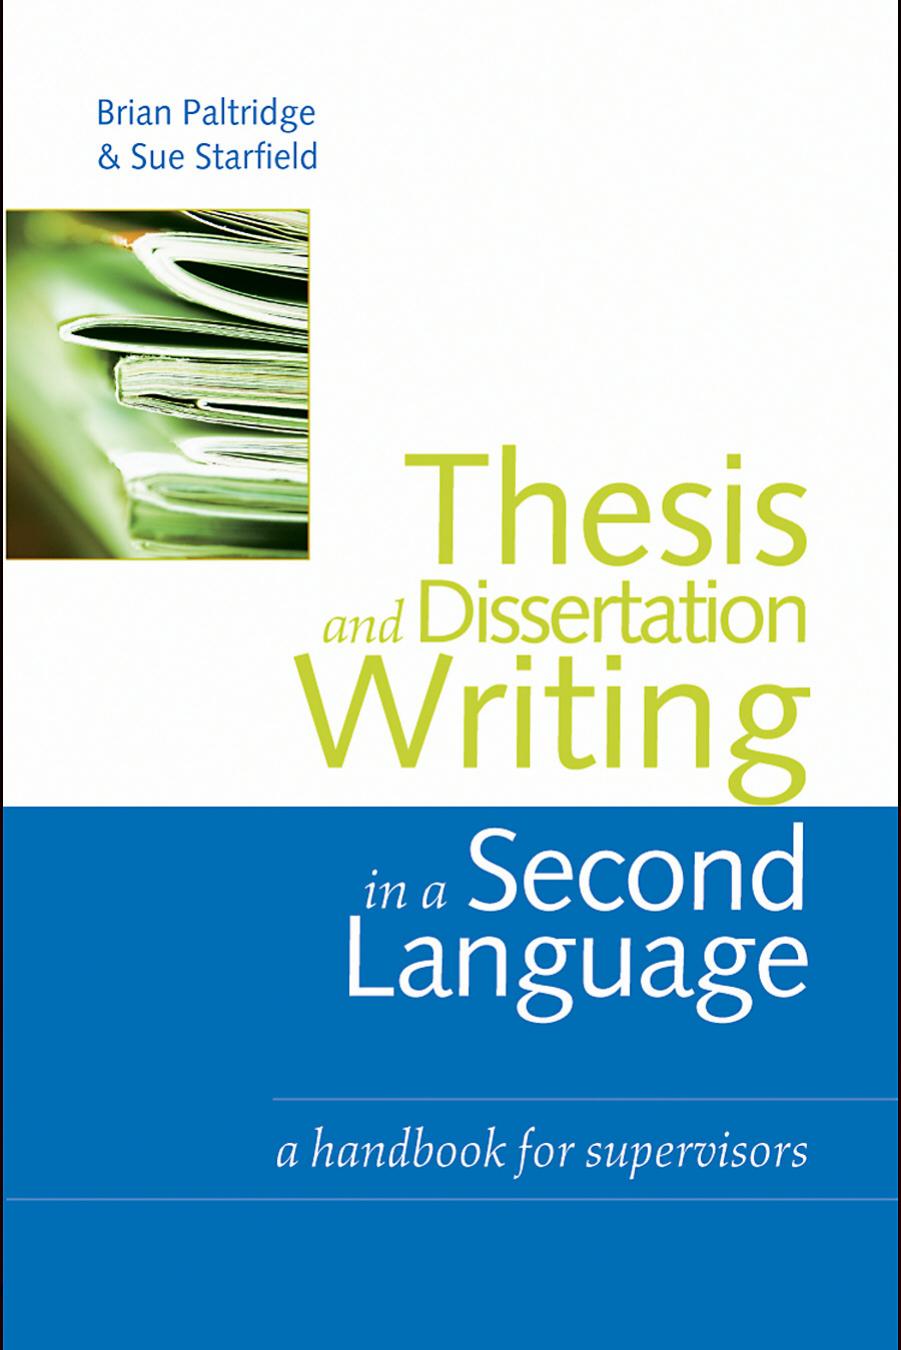 Thesis and Dissertation Writing in a Second Language: A Handbook for Supervisors